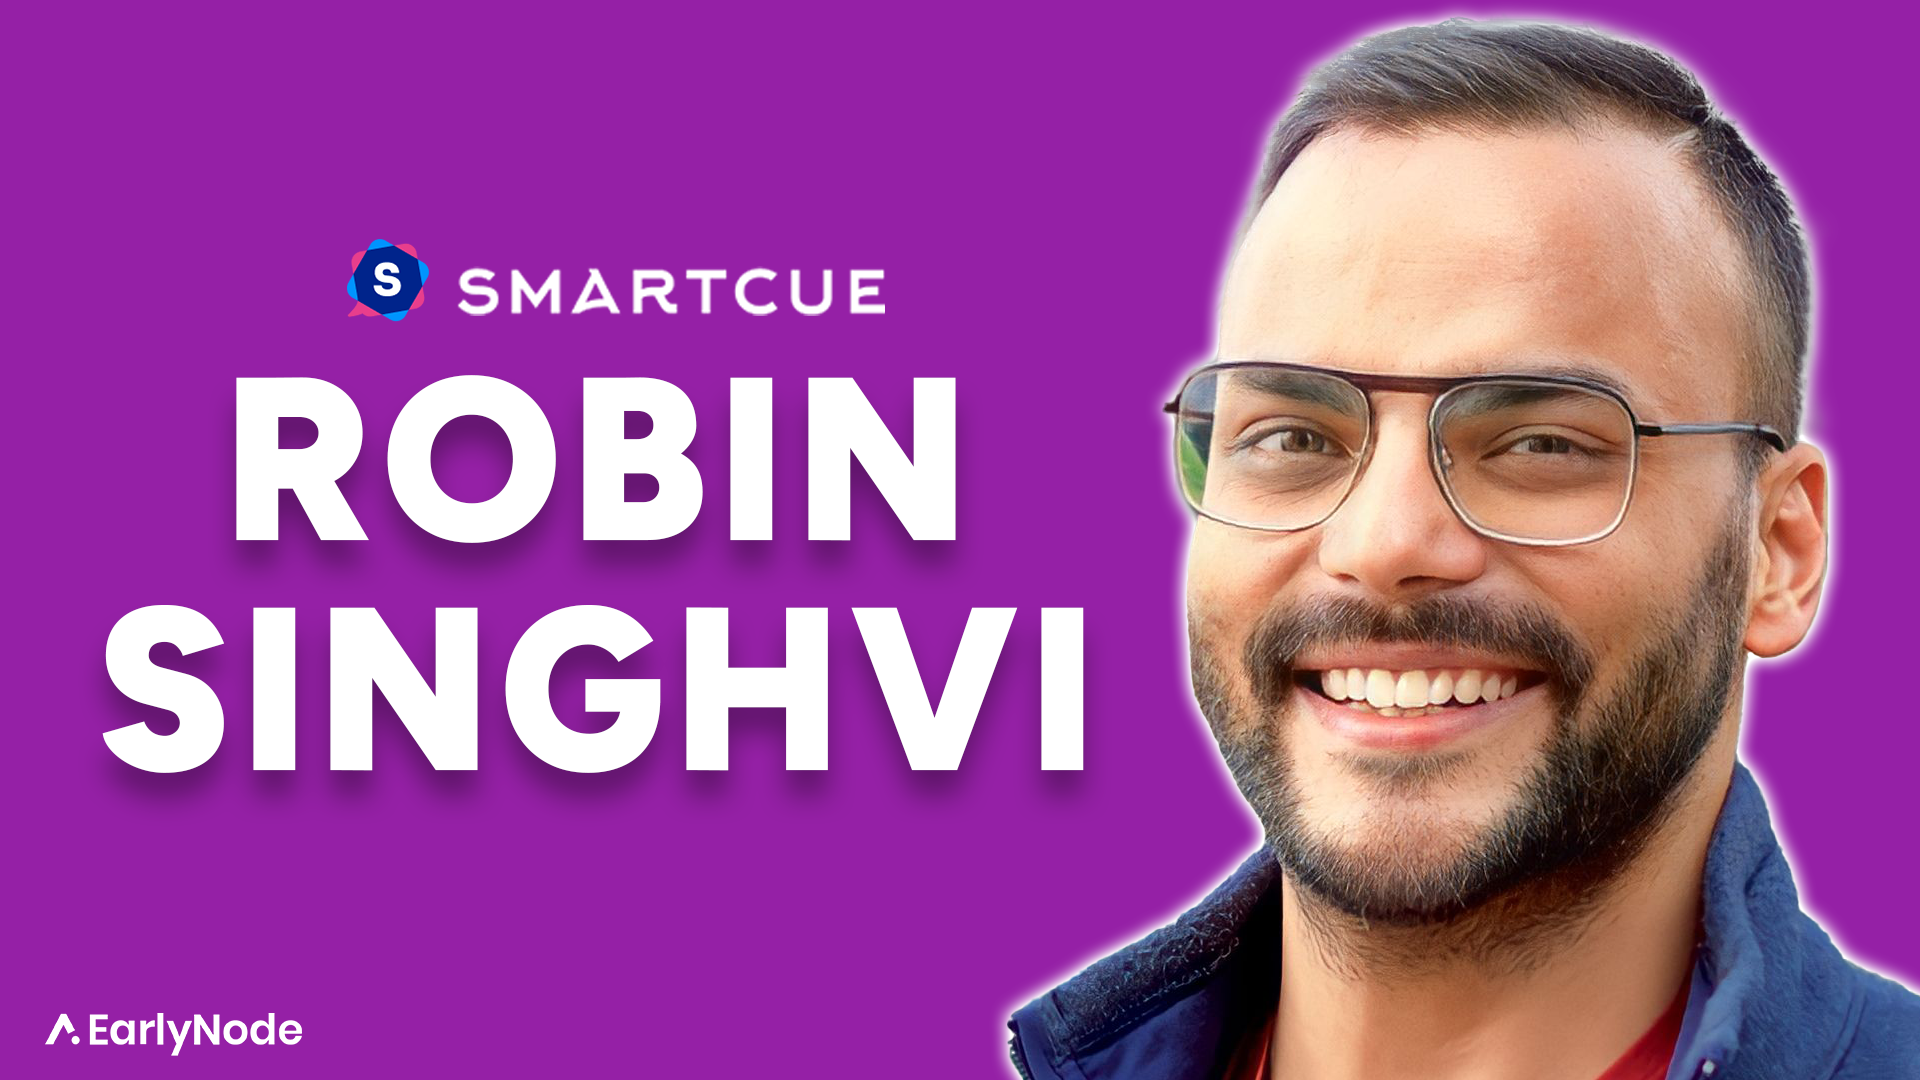 Bearish VC Market, Life as a Solopreneur, and much more with Robin Singhvi, founder of SmartCue